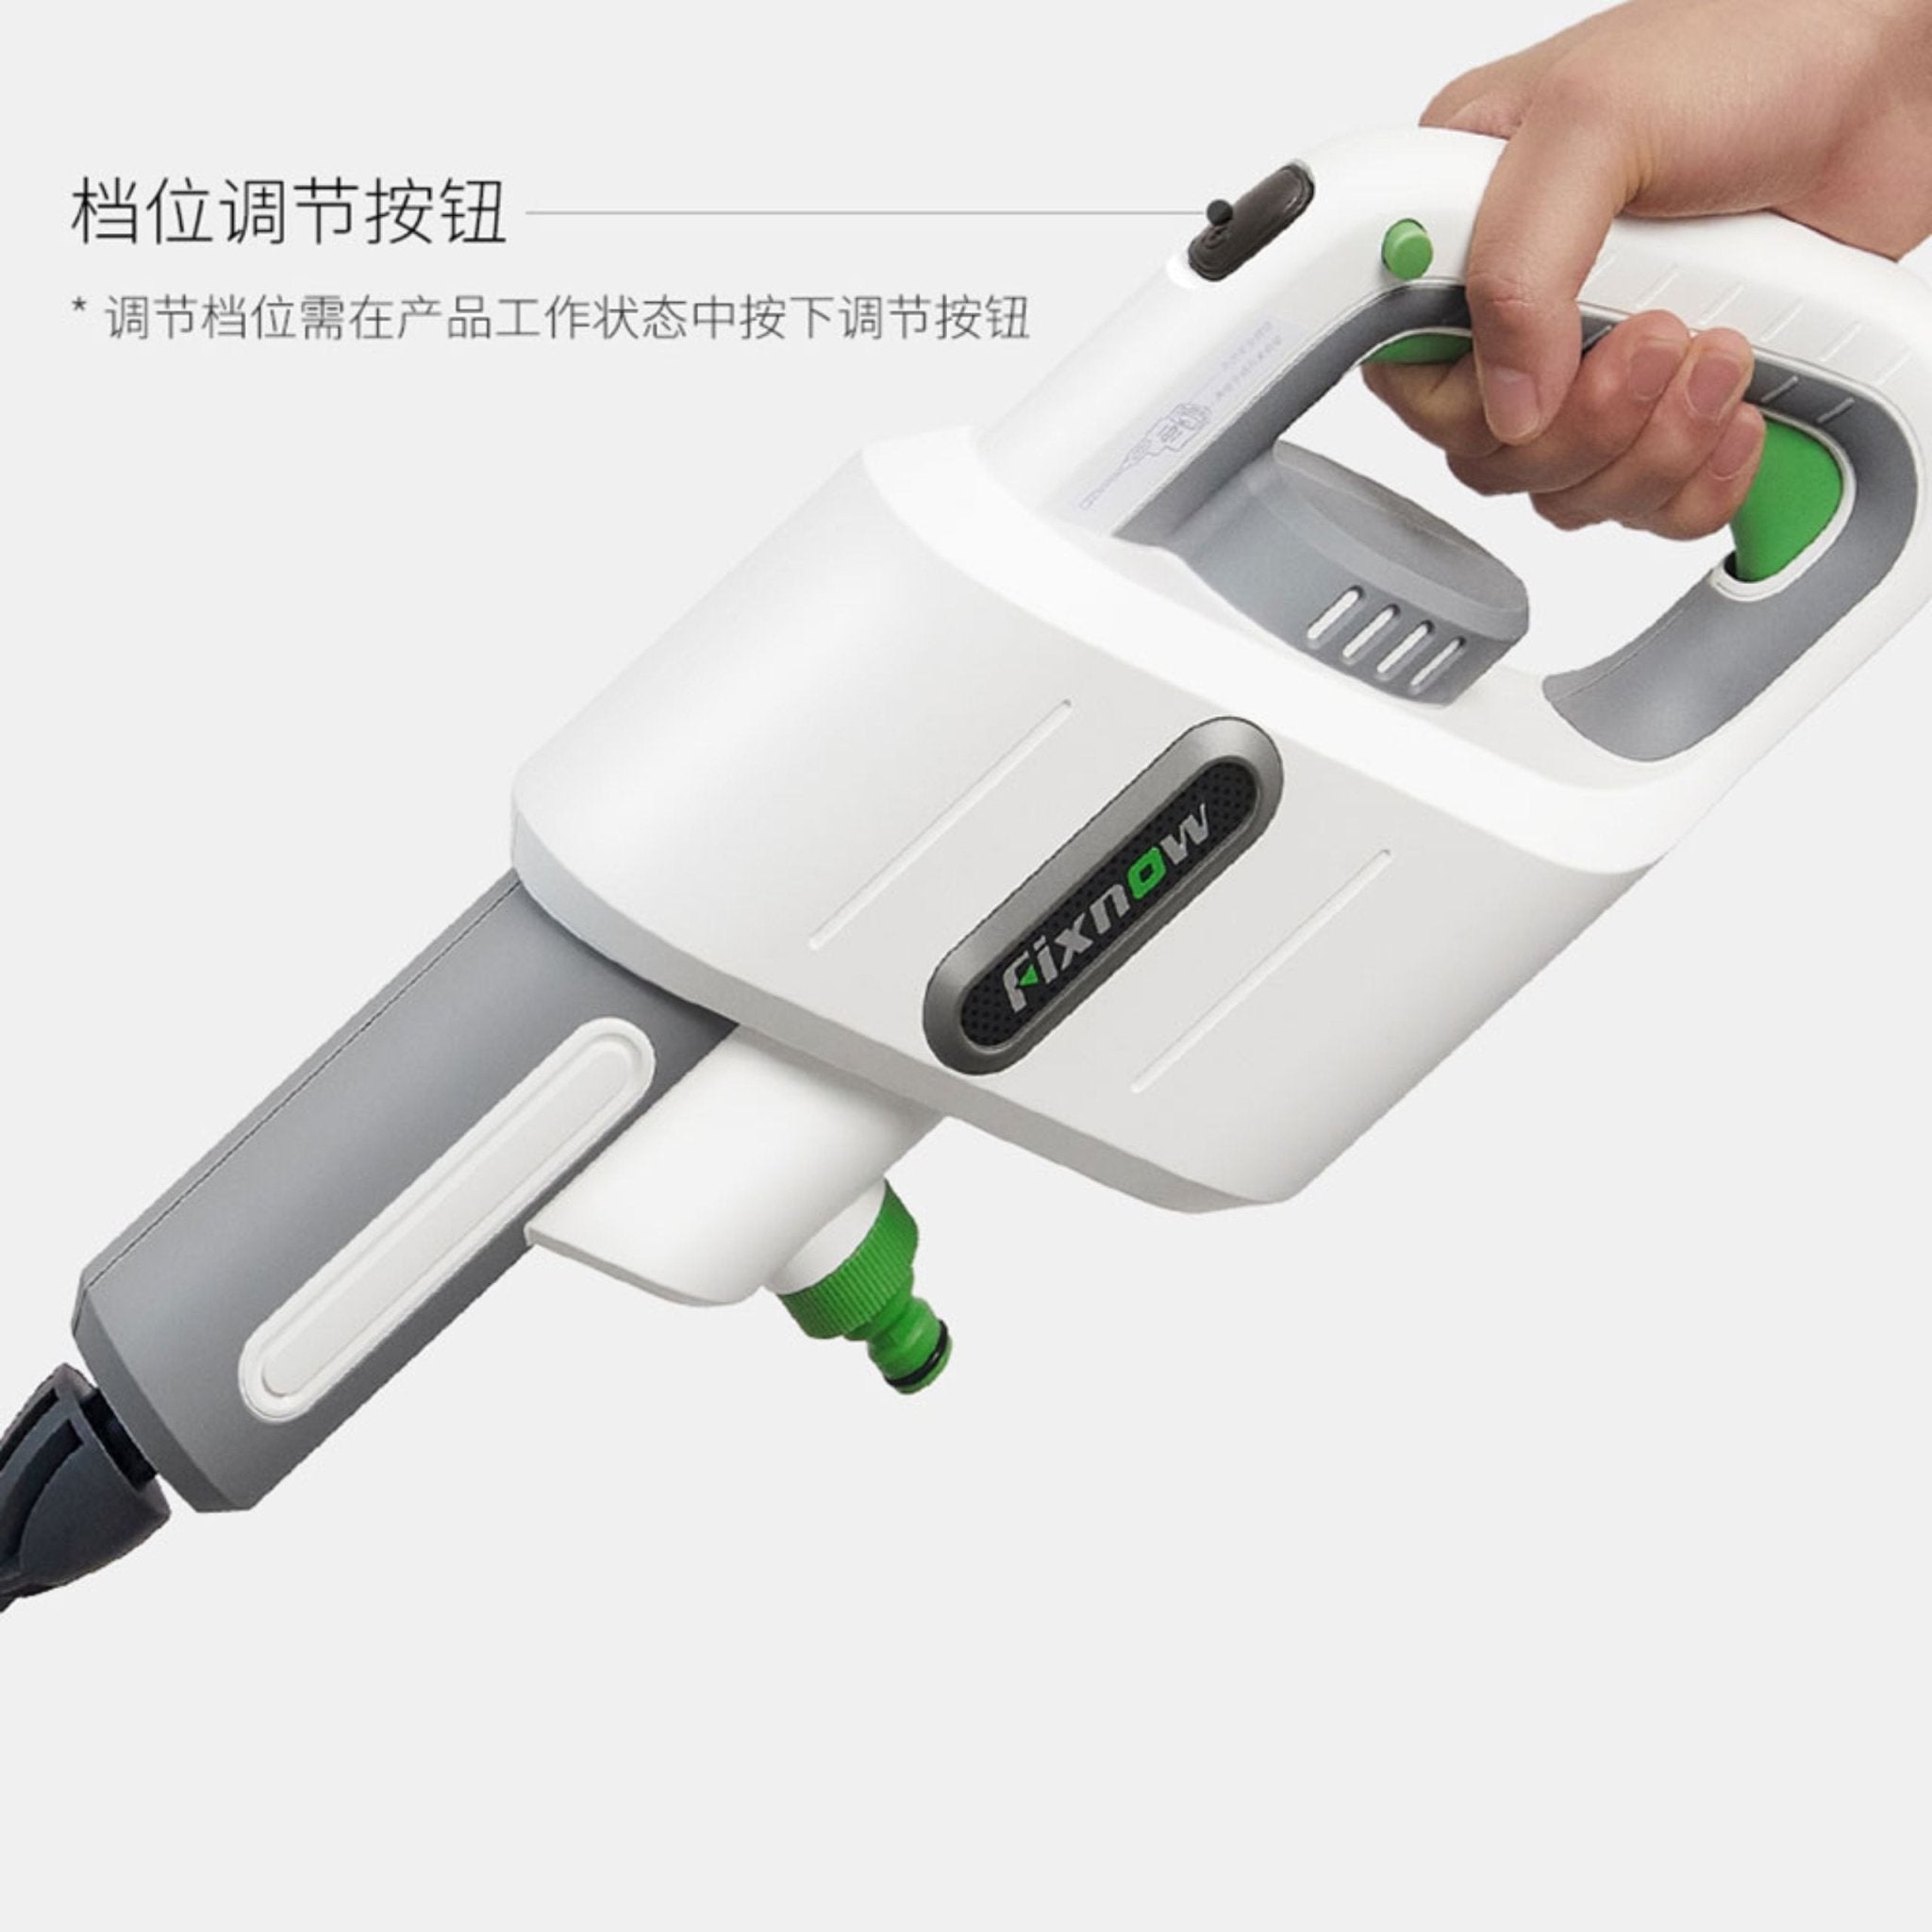 Xiaomi Youpin Fixnow High Pressure Handheld Wireless Car Washer Cordless 24v XYQX-300E